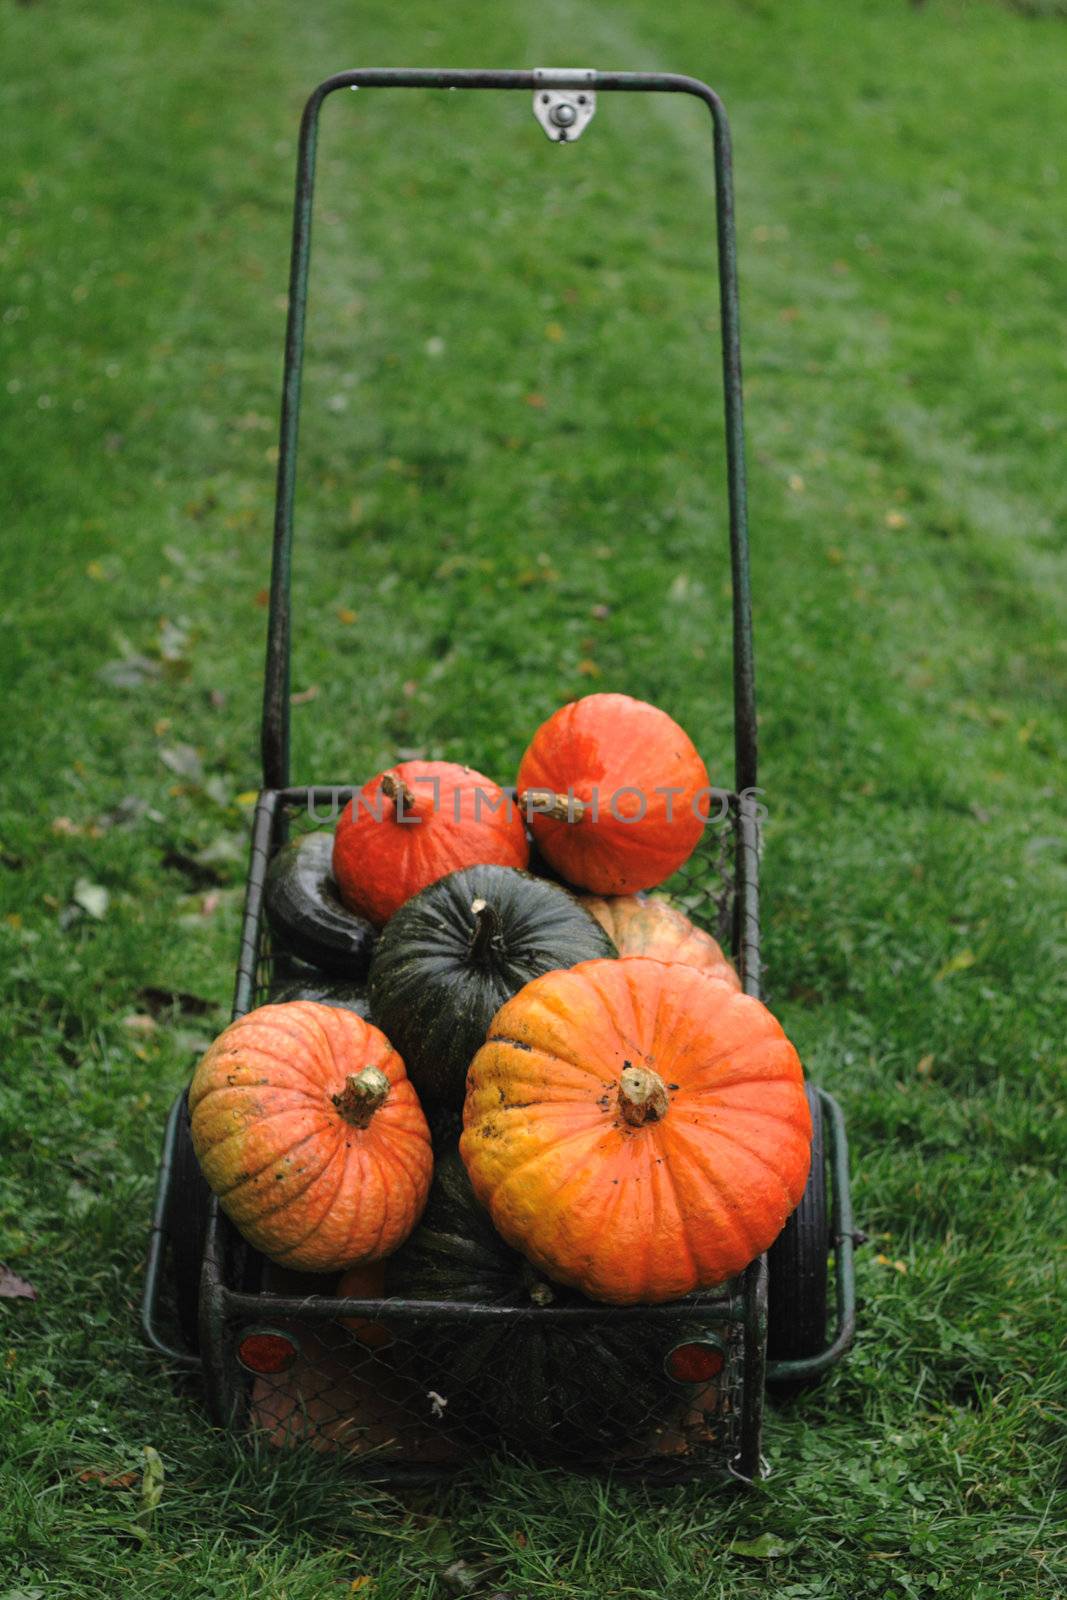 pumpkins in the transportation vehicle on the green grass